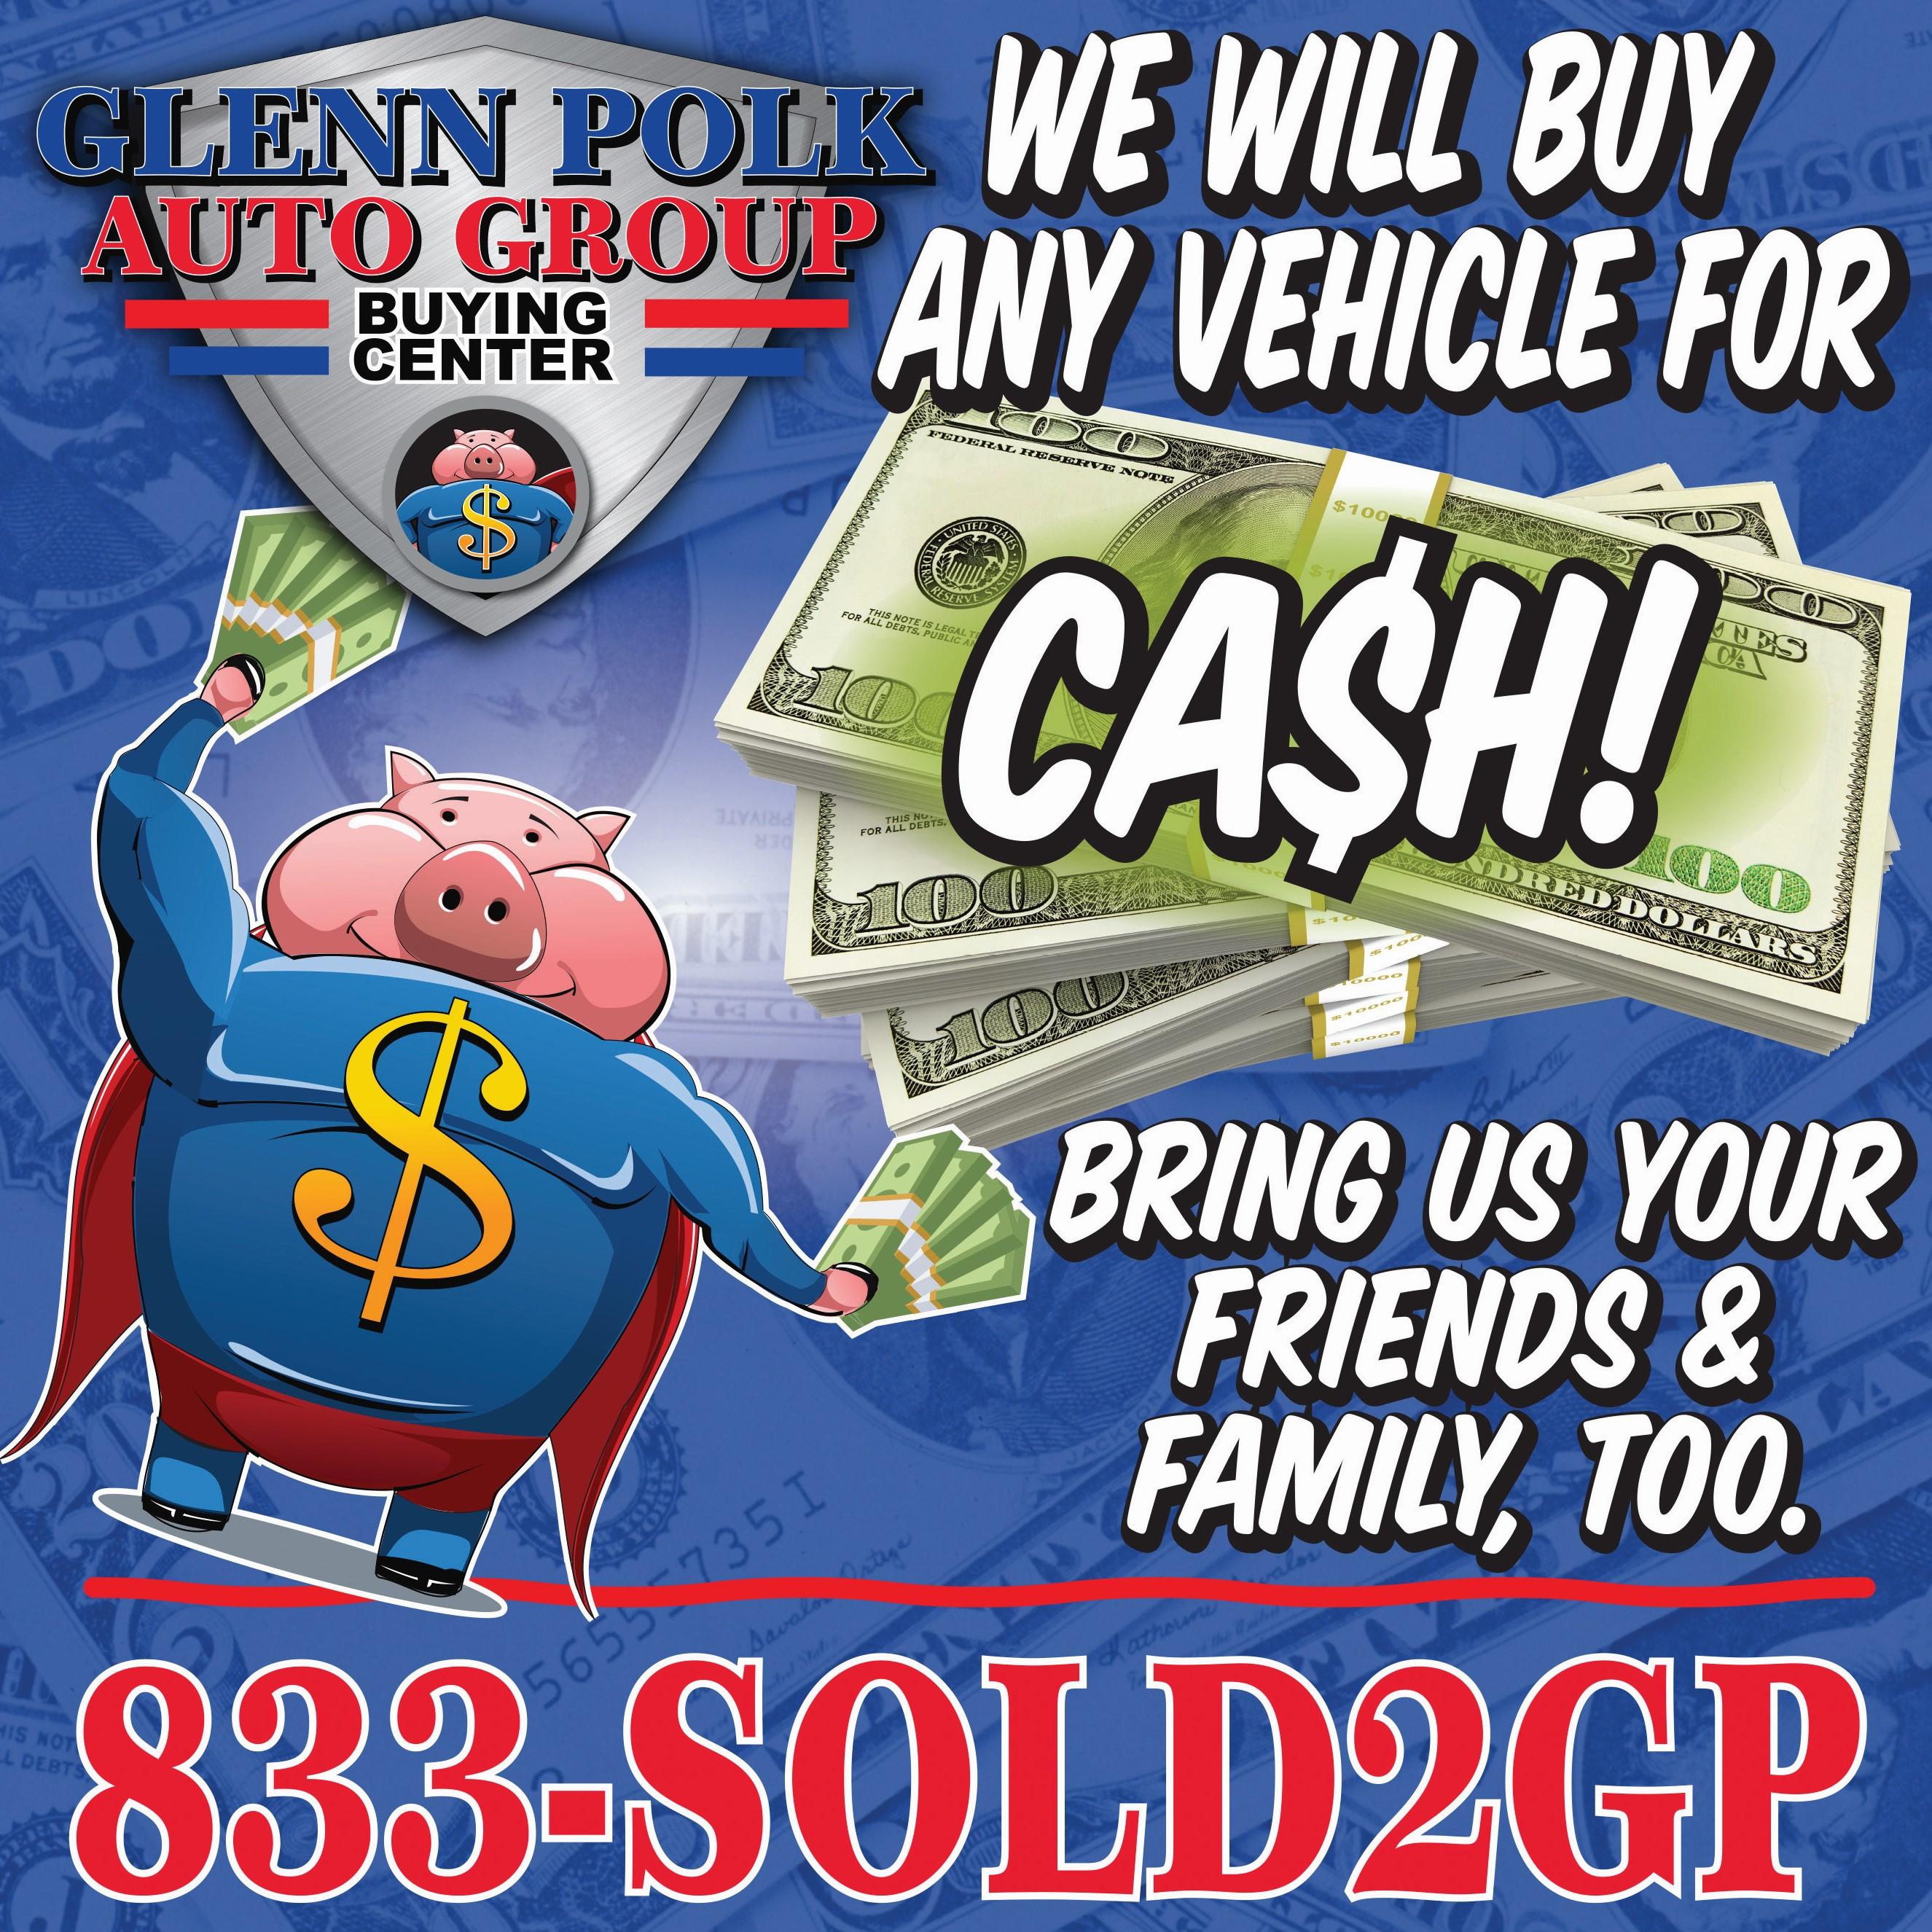 POLKY THE PIG FROM GLENN POLK WILL BUY YOUR VEHICLE WITH CASH